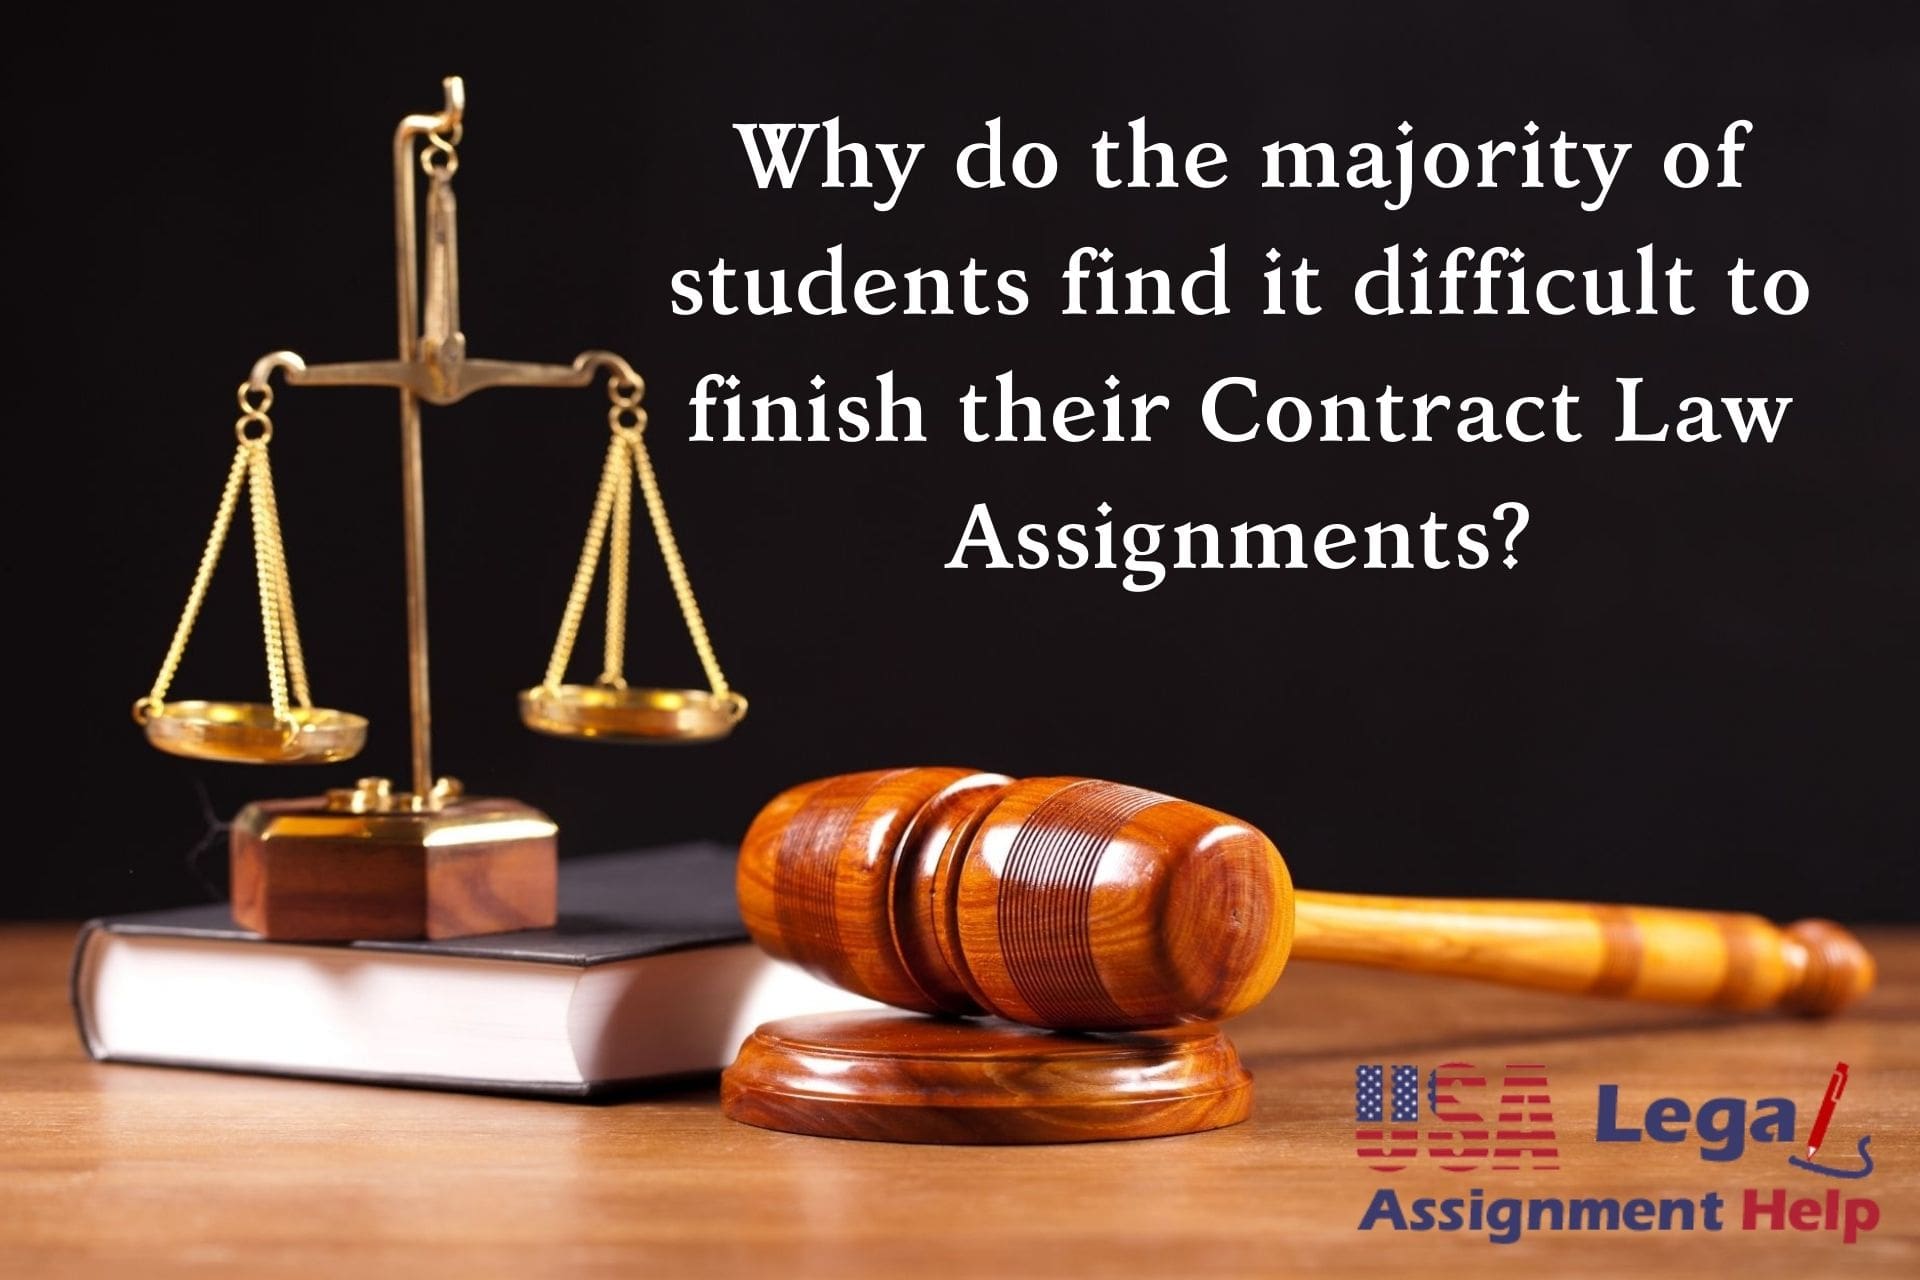 Why do the majority of students find it difficult to finish their Contract Law Assignments?